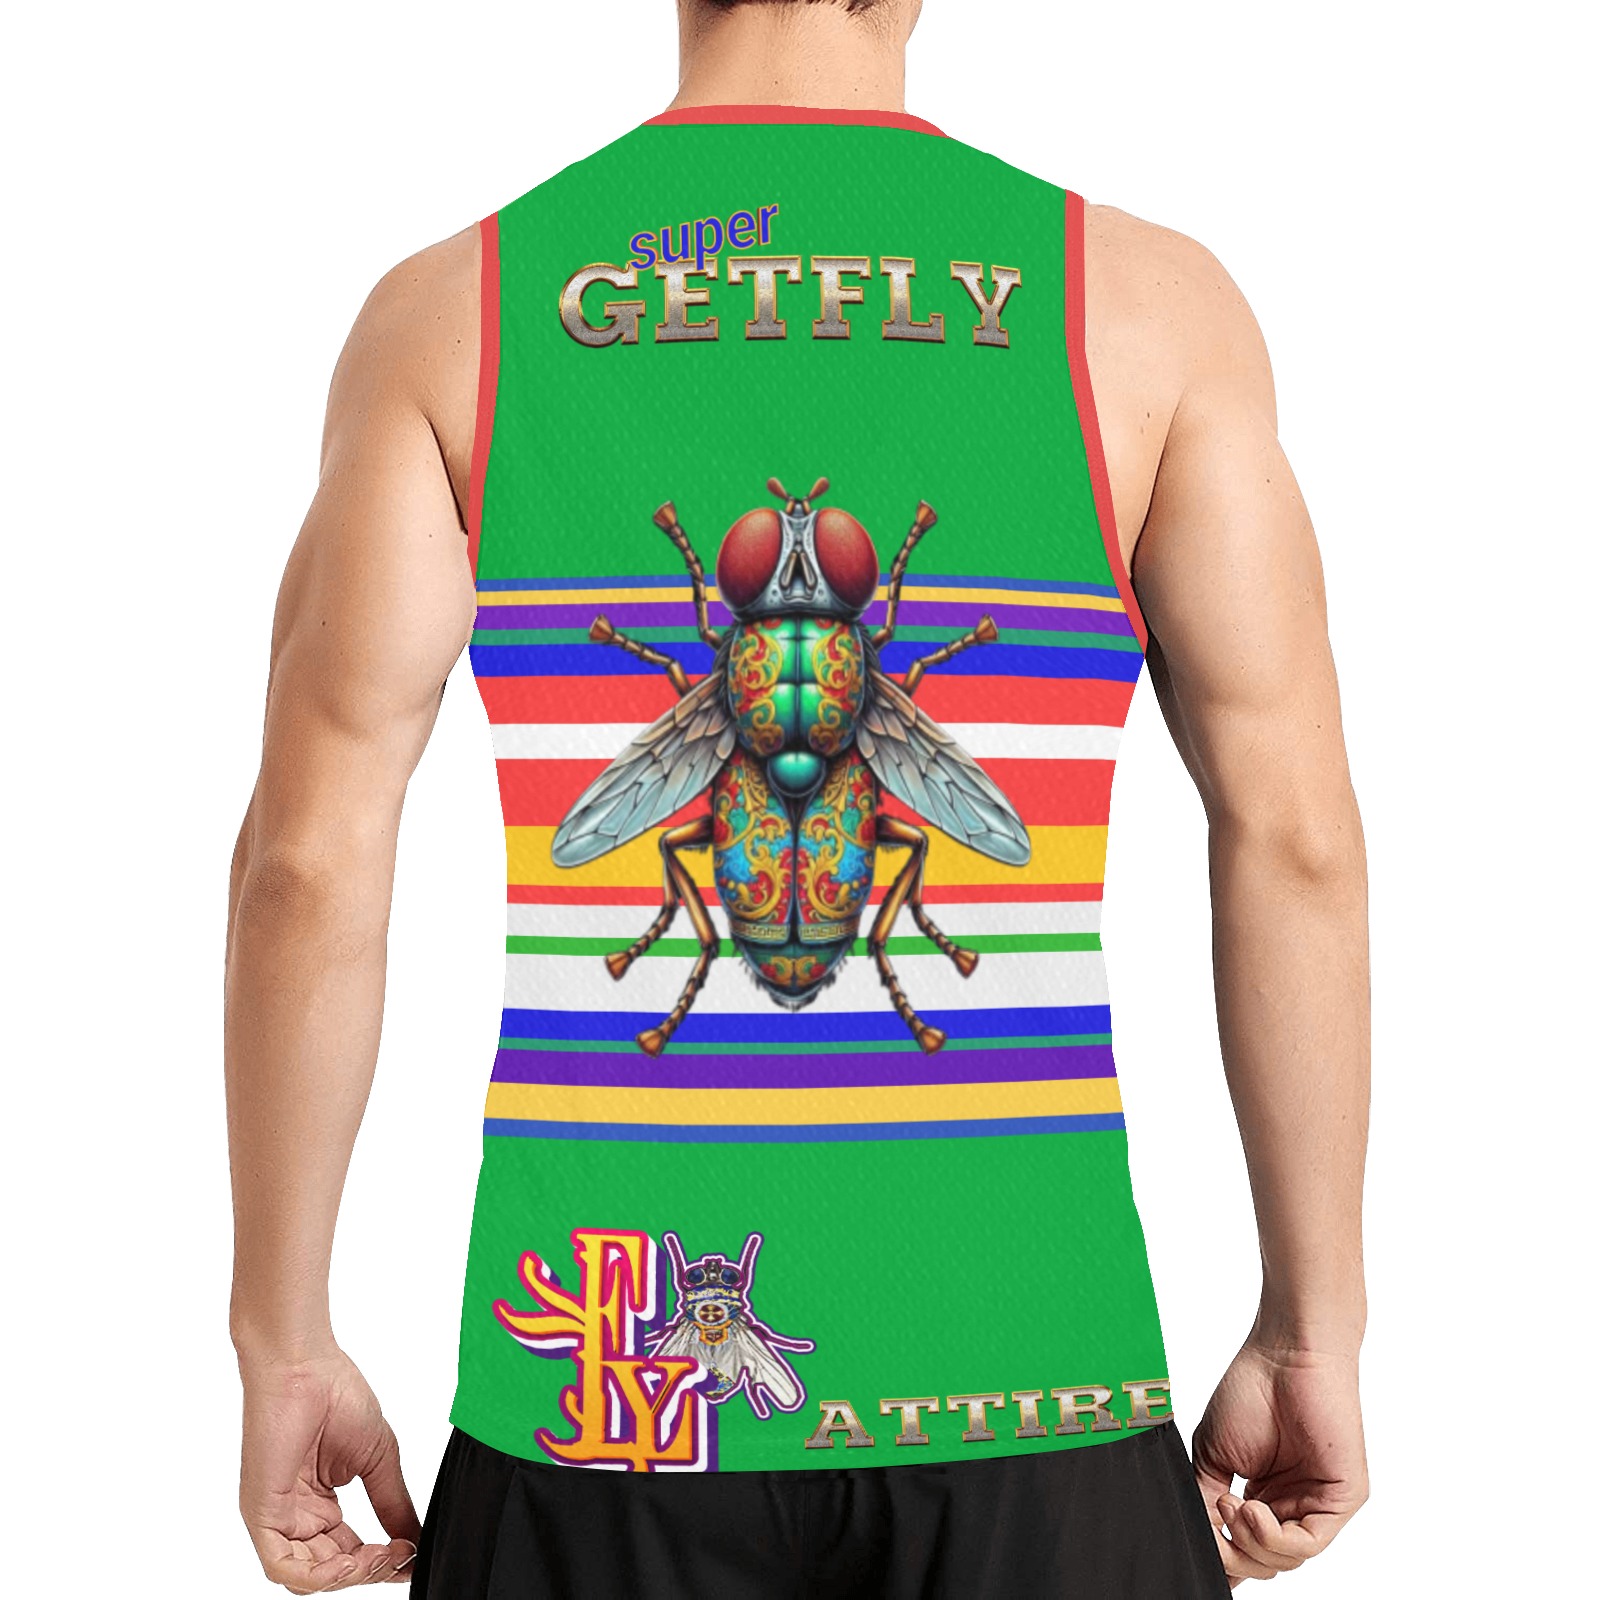 Super Getfly Collectable All Over Print Basketball Jersey